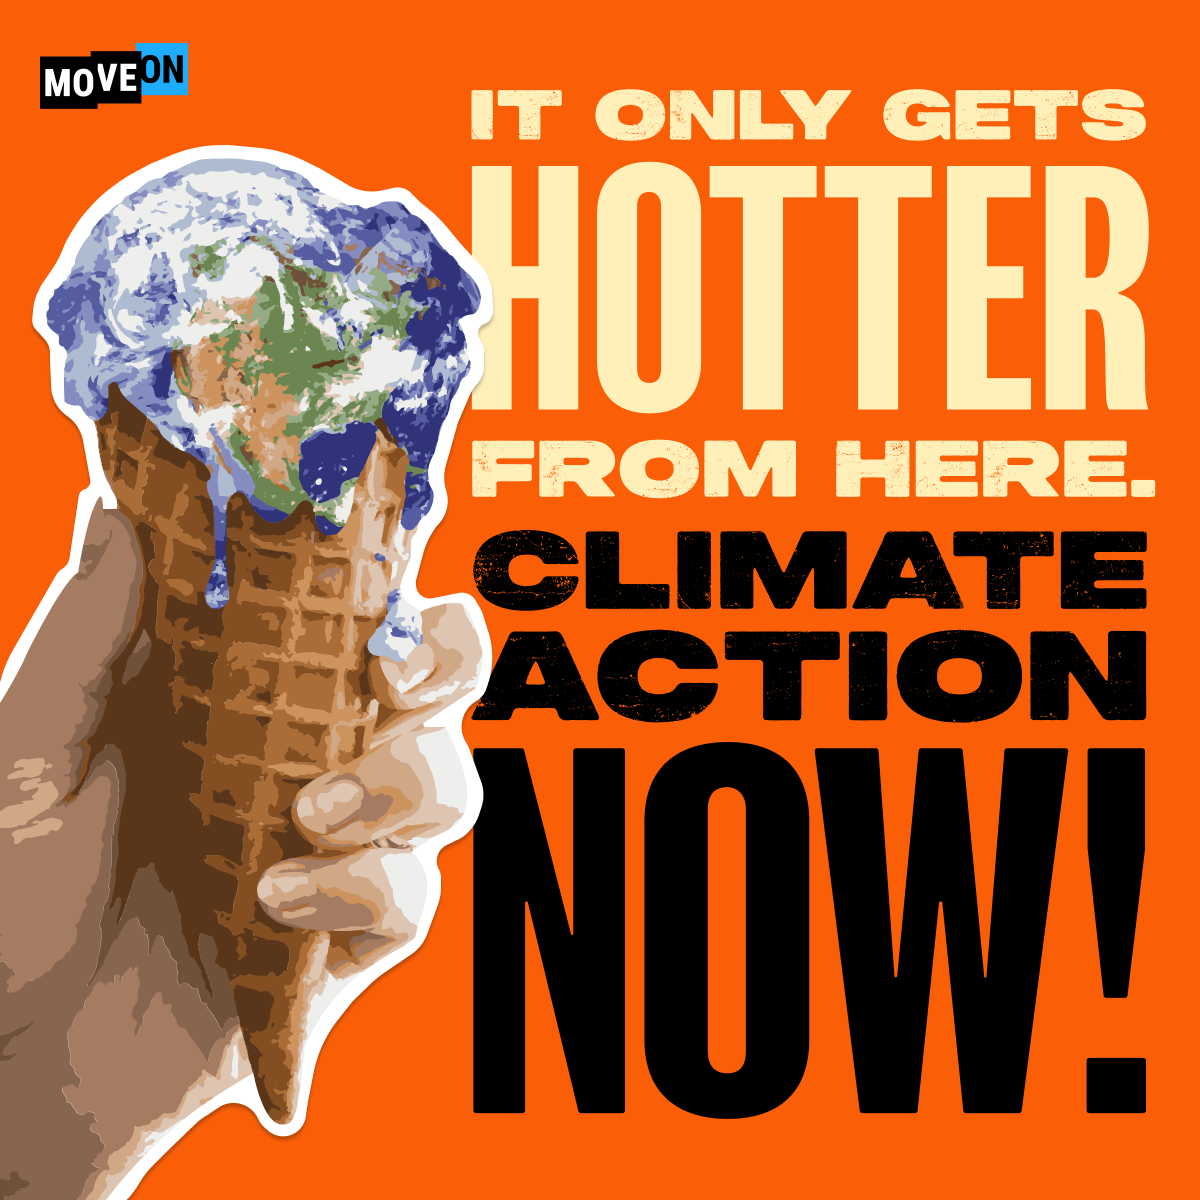 Climate action now